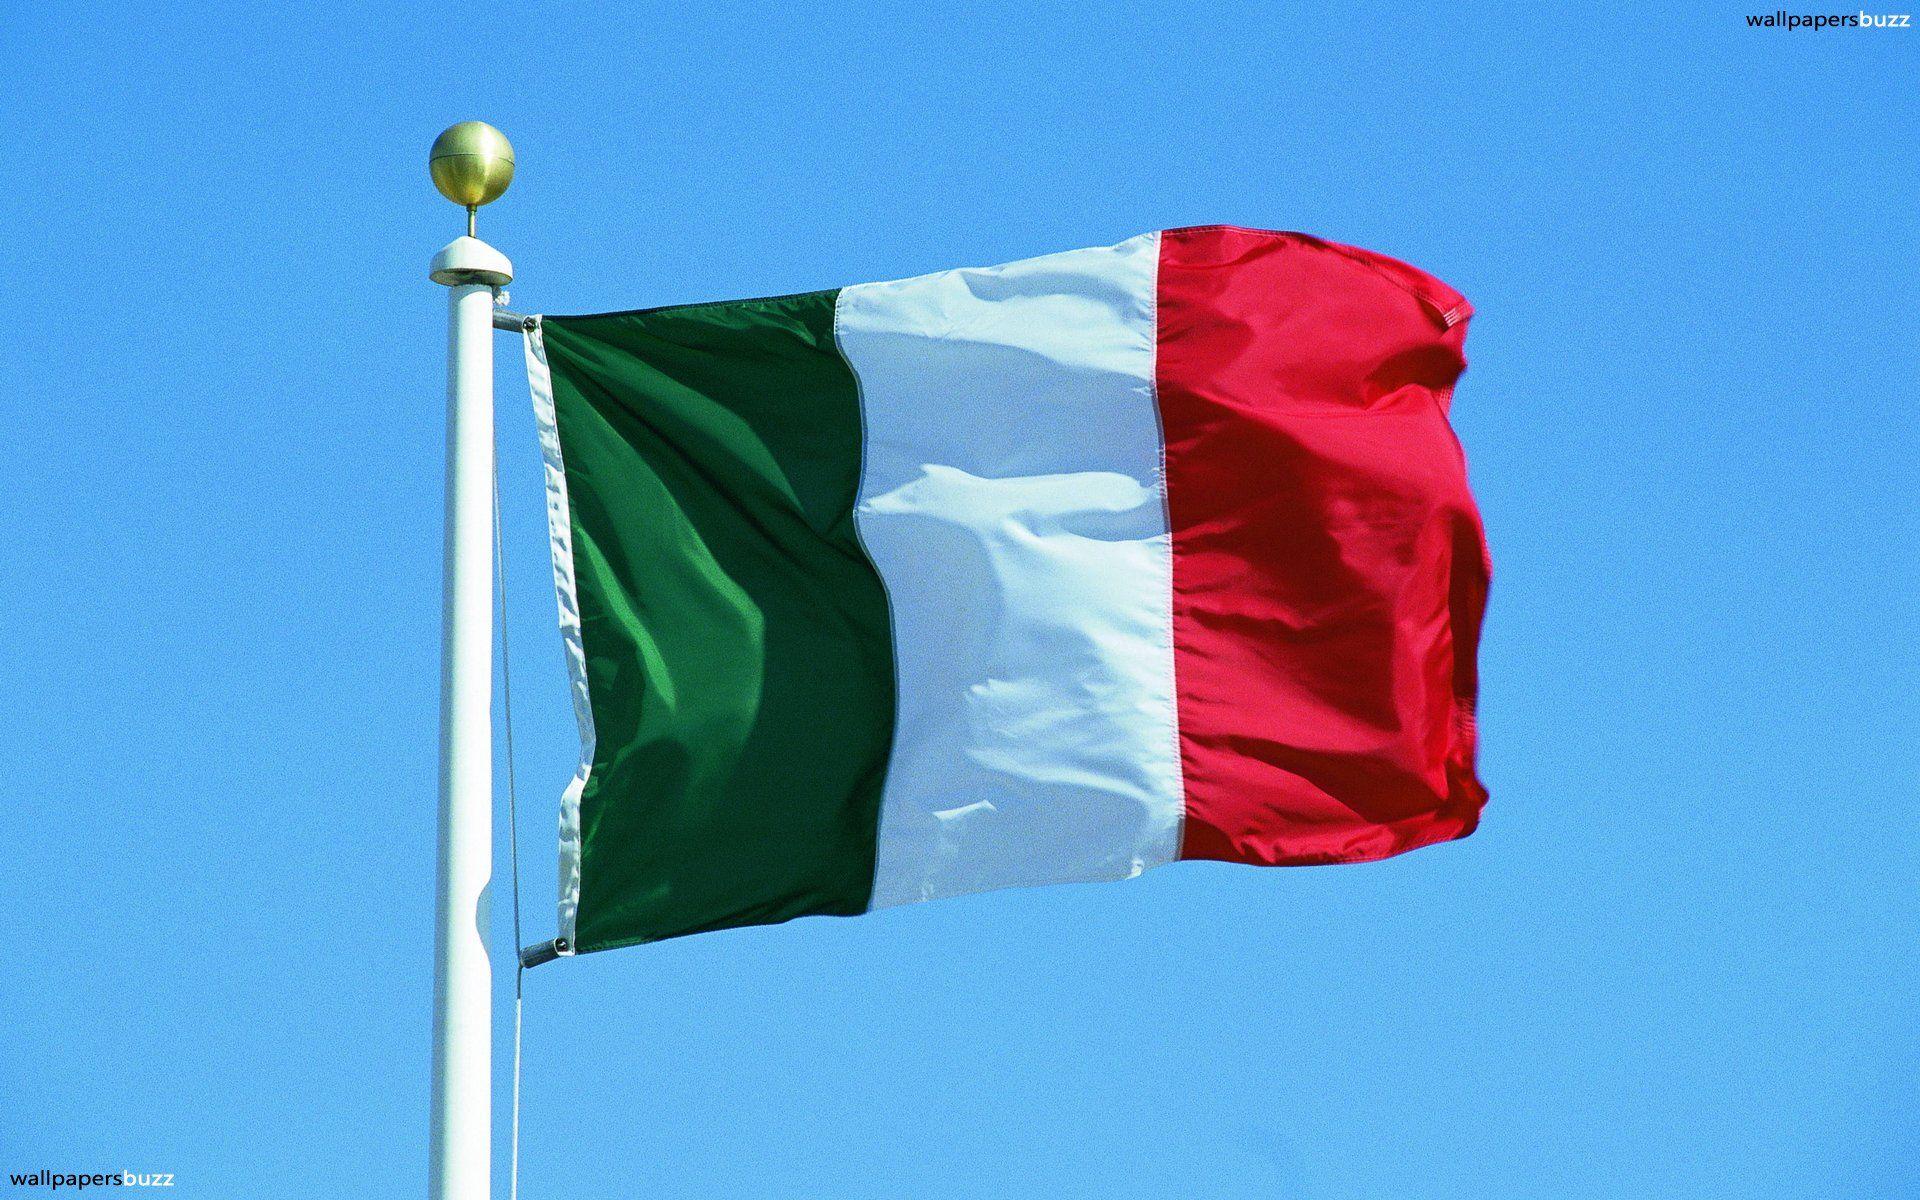 The traditional flag of Italy HD Wallpaper